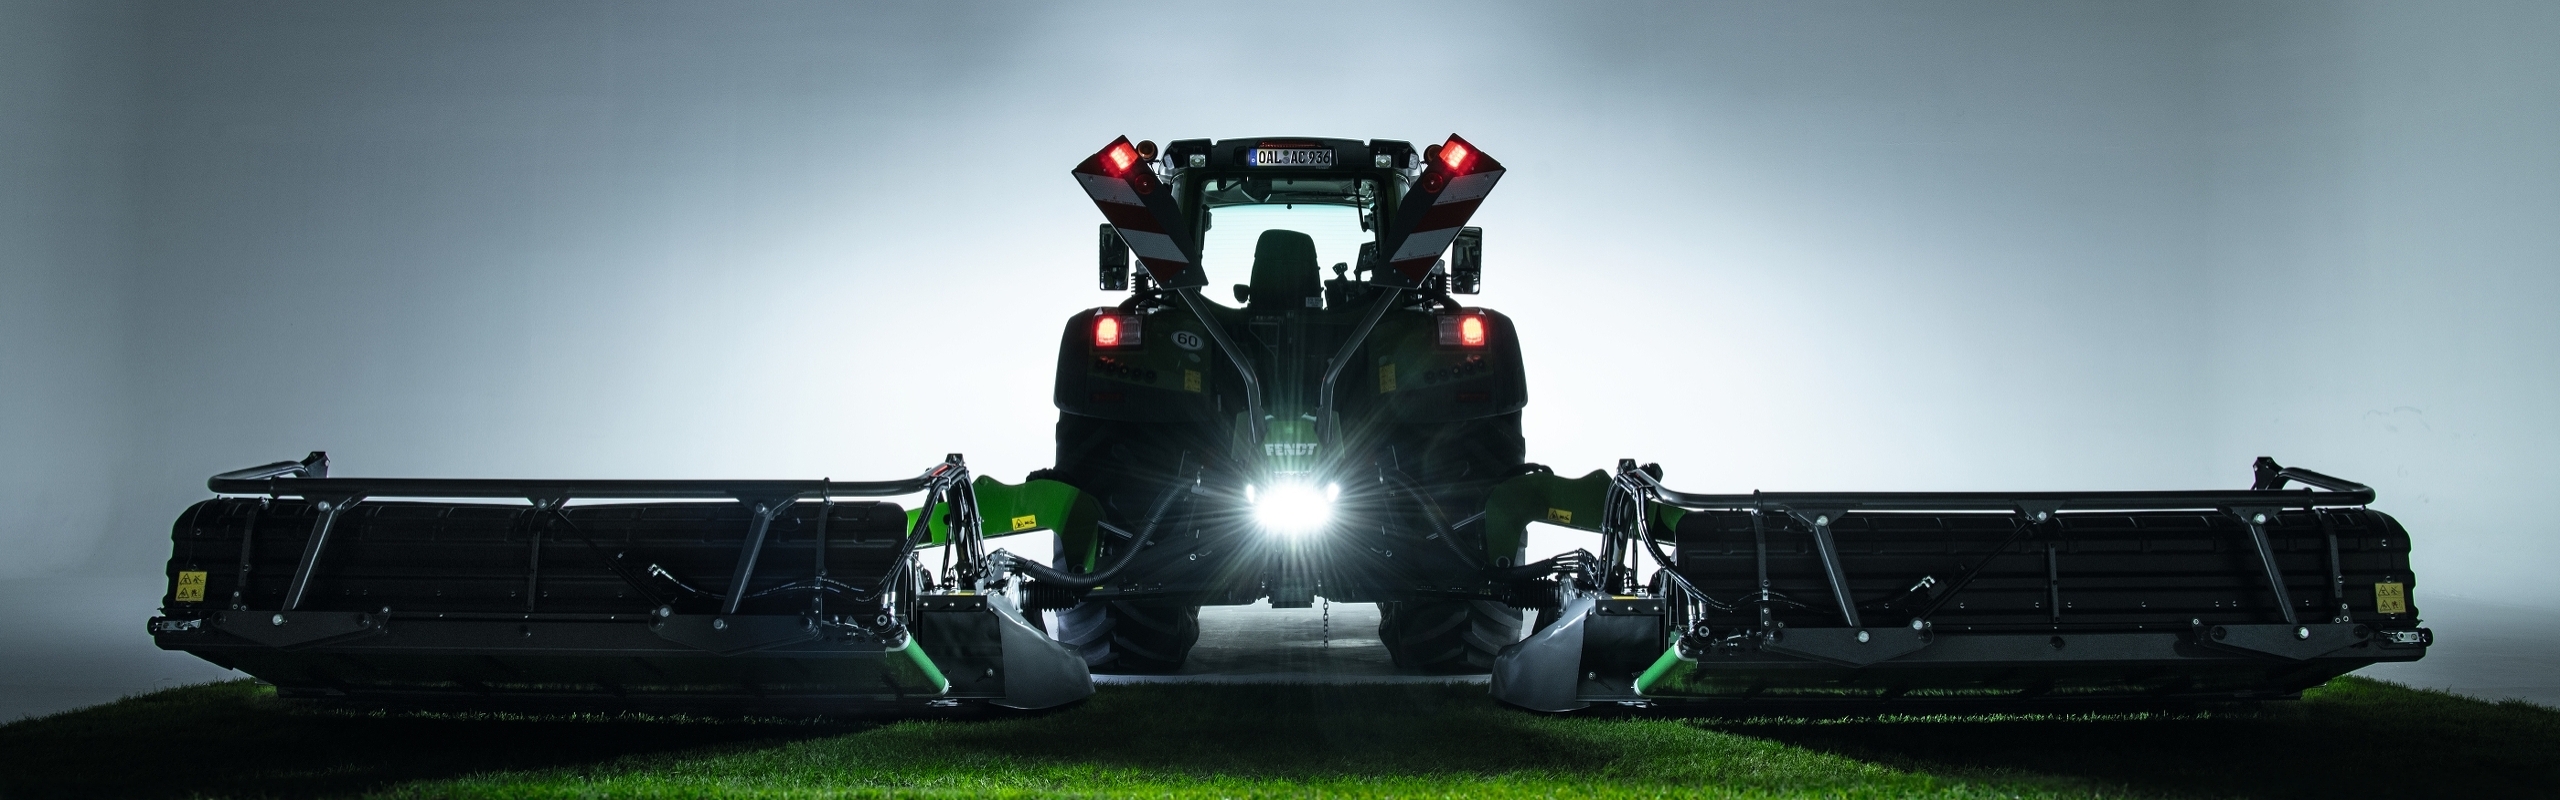 A Fendt tractor with a Fendt Slicer disc mower standing in a field at dusk.